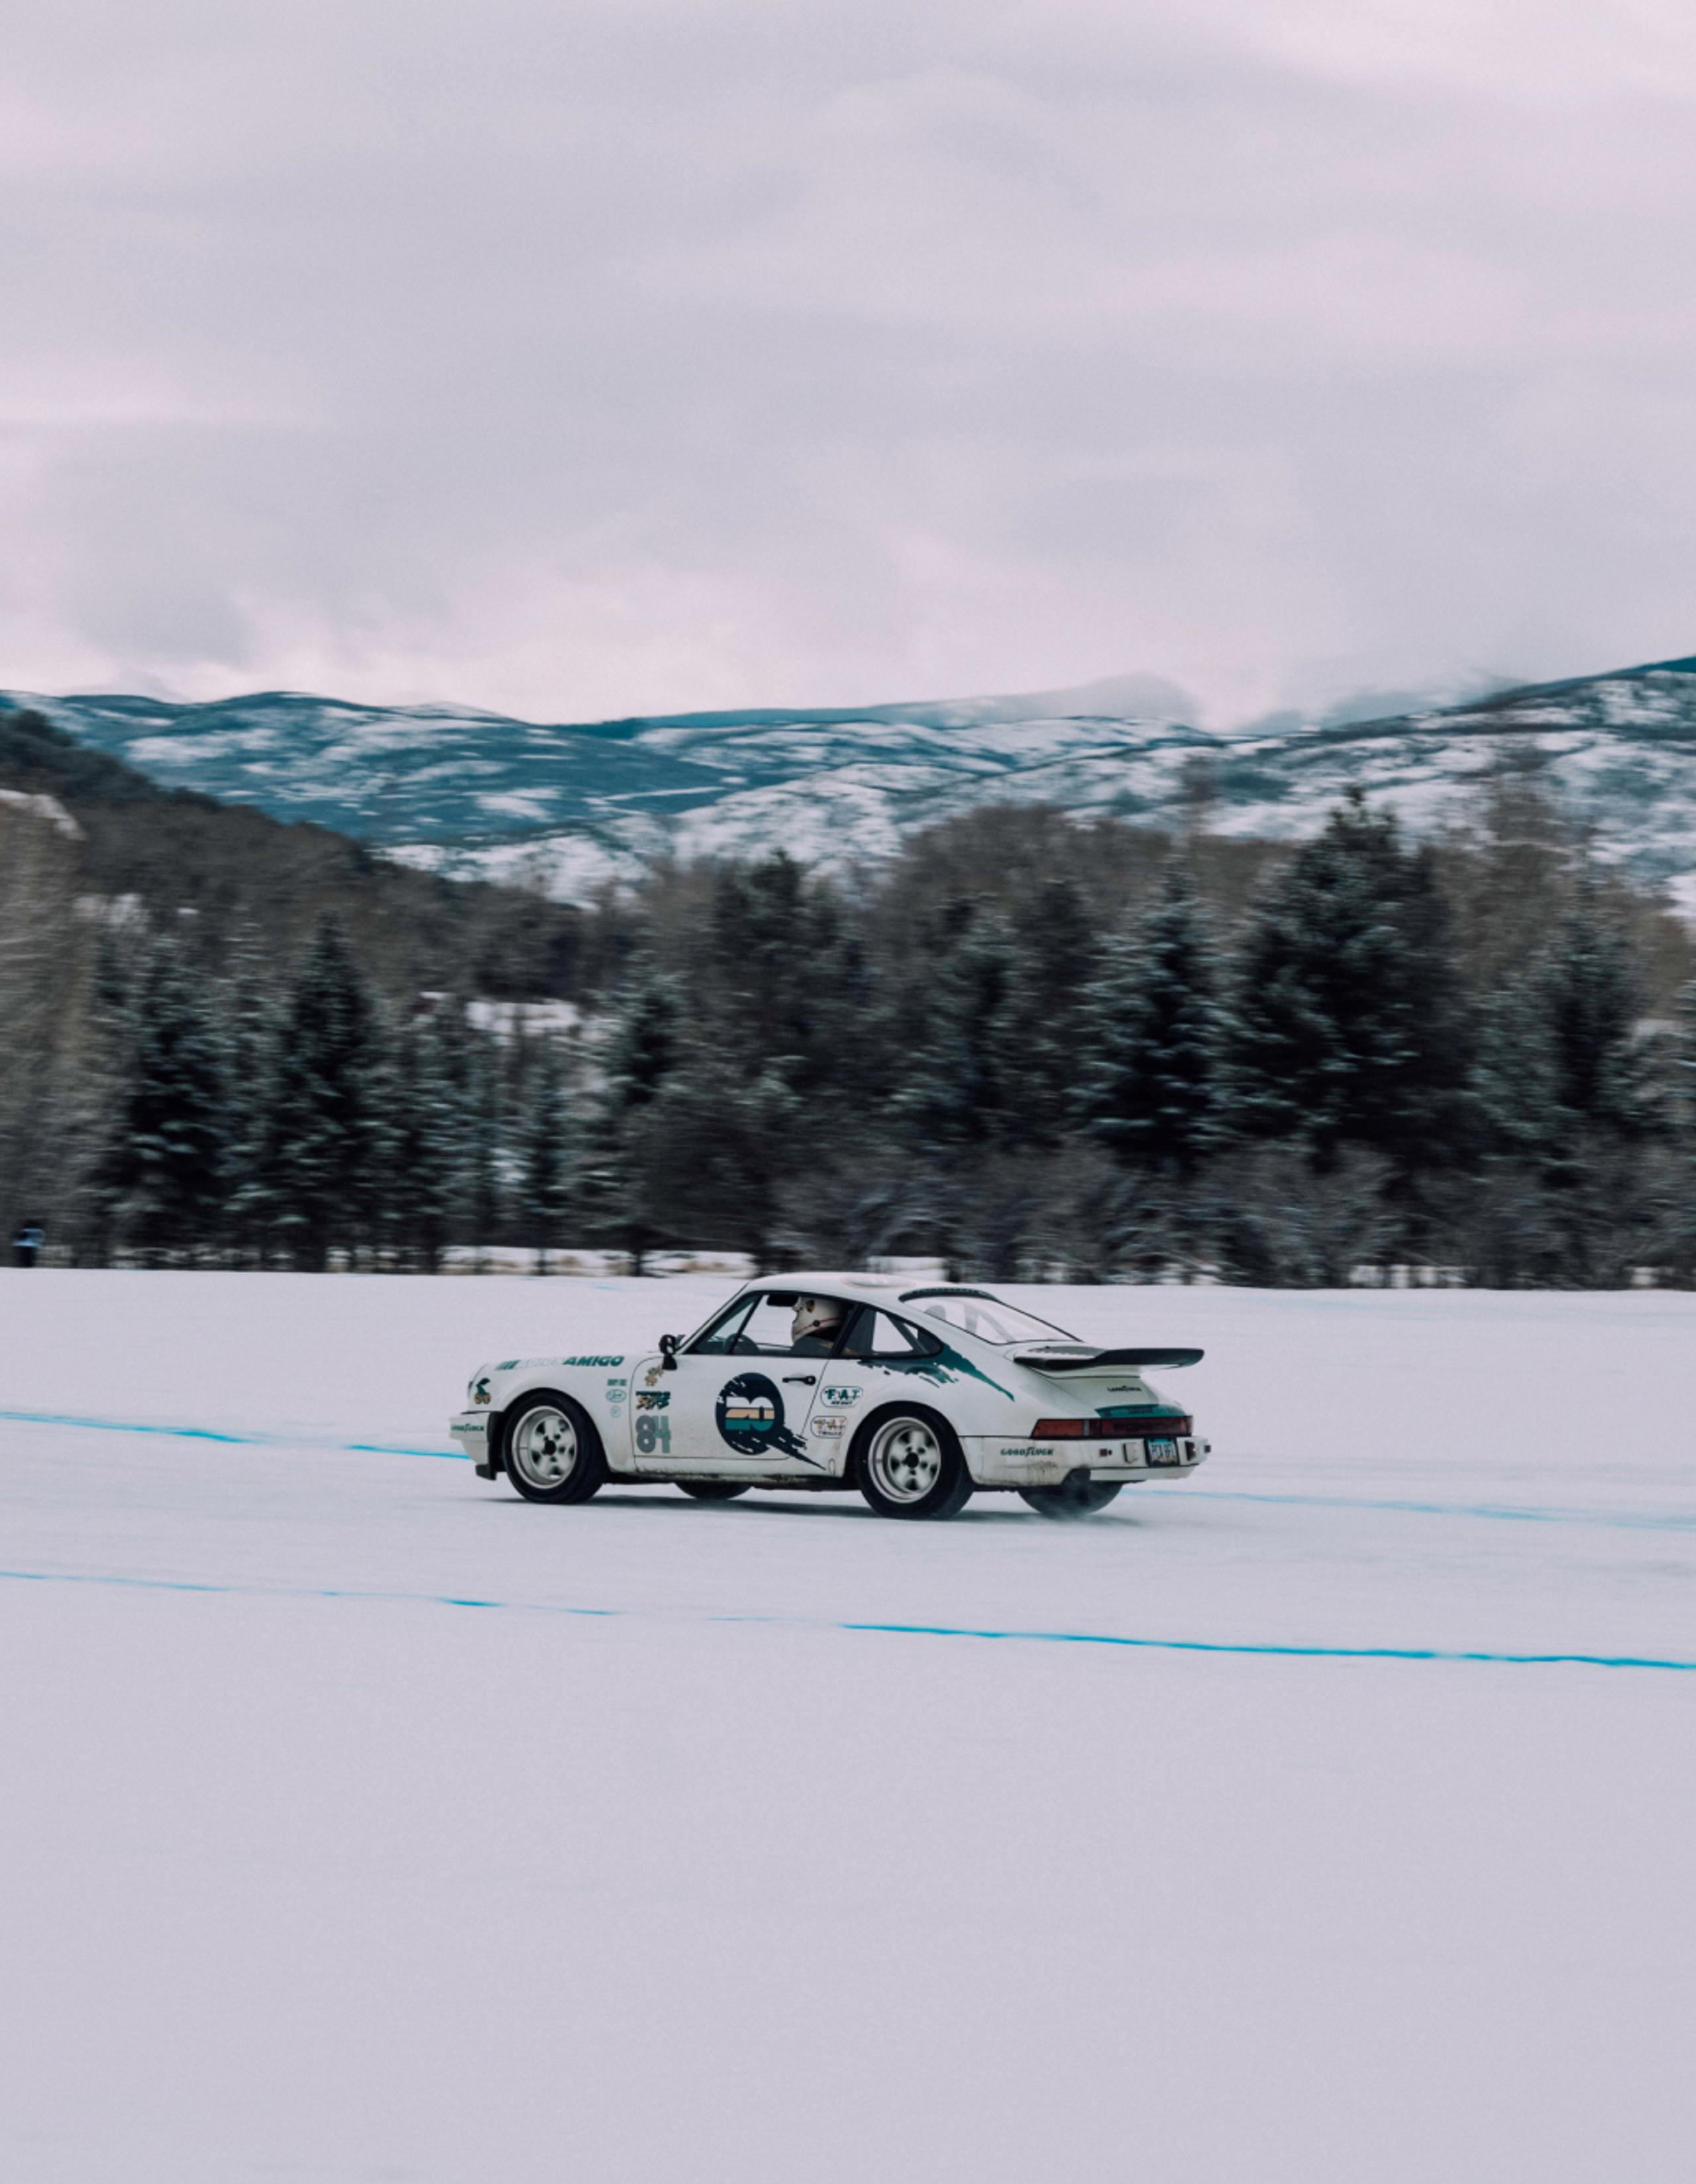 White Porsche 911 driving on ice track with mountains in the background